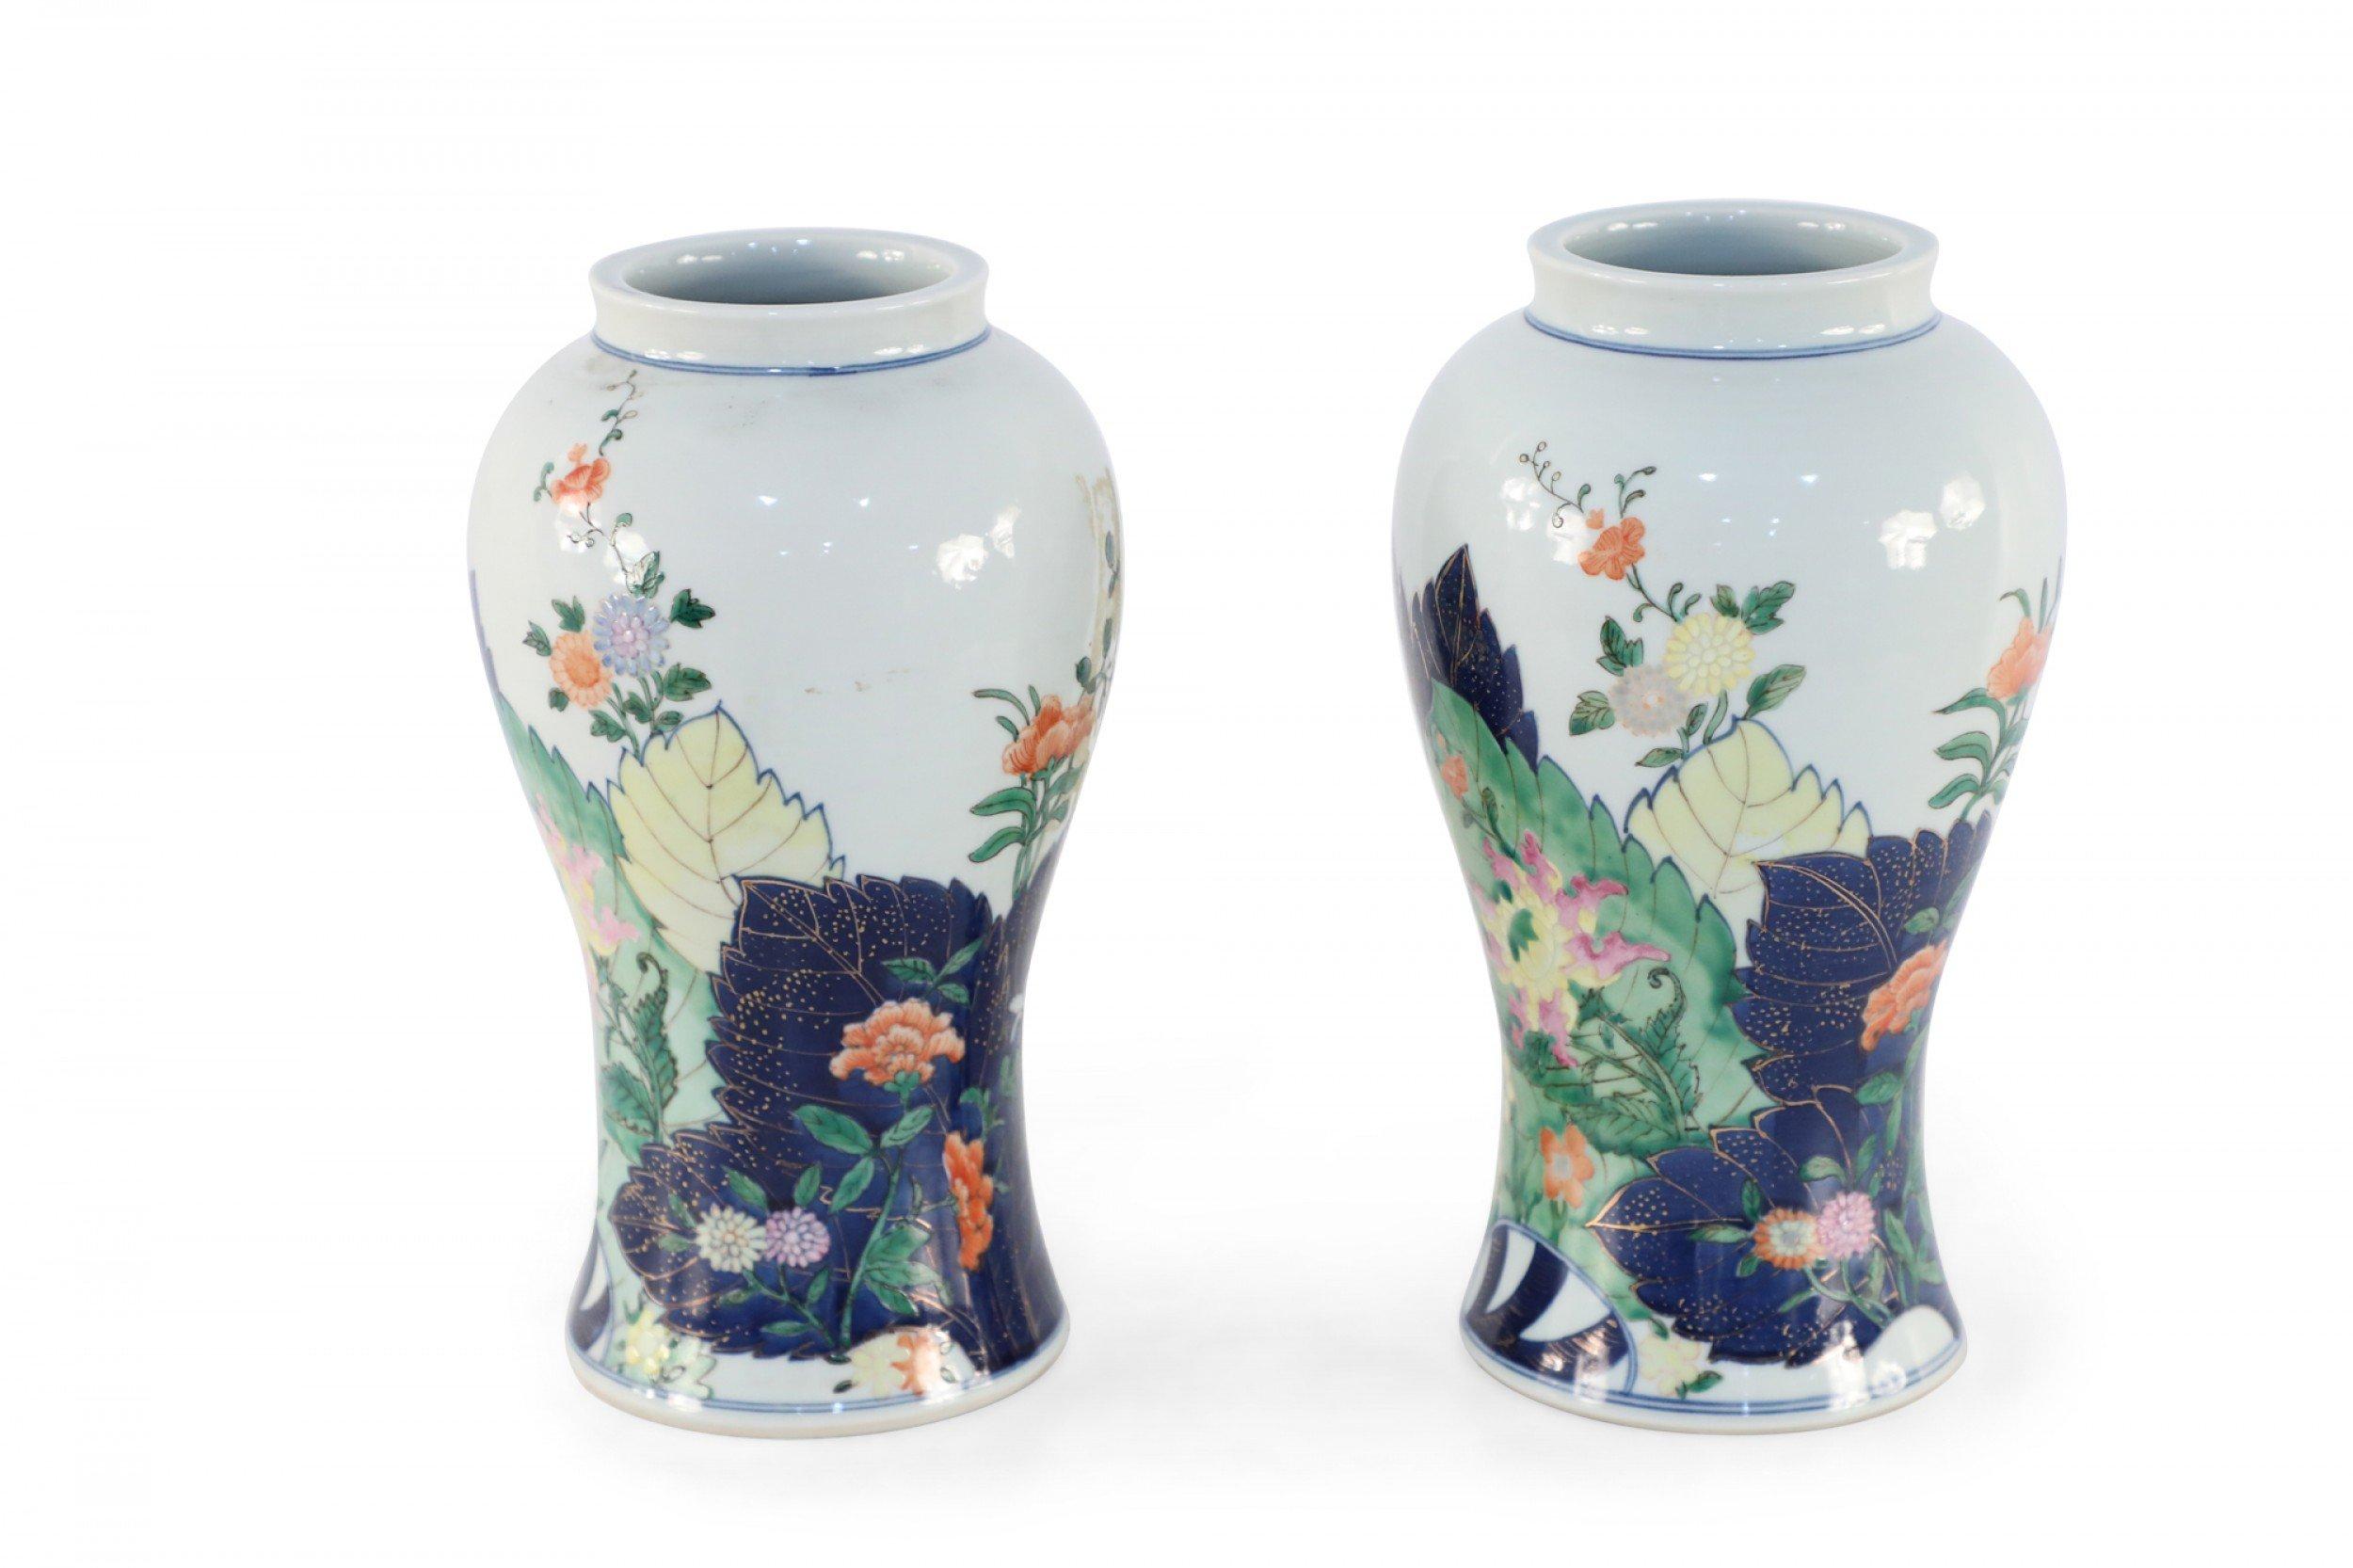 Pair of Chinese White Peacock and Floral Design Urn-Shaped Porcelain Vases In Good Condition For Sale In New York, NY